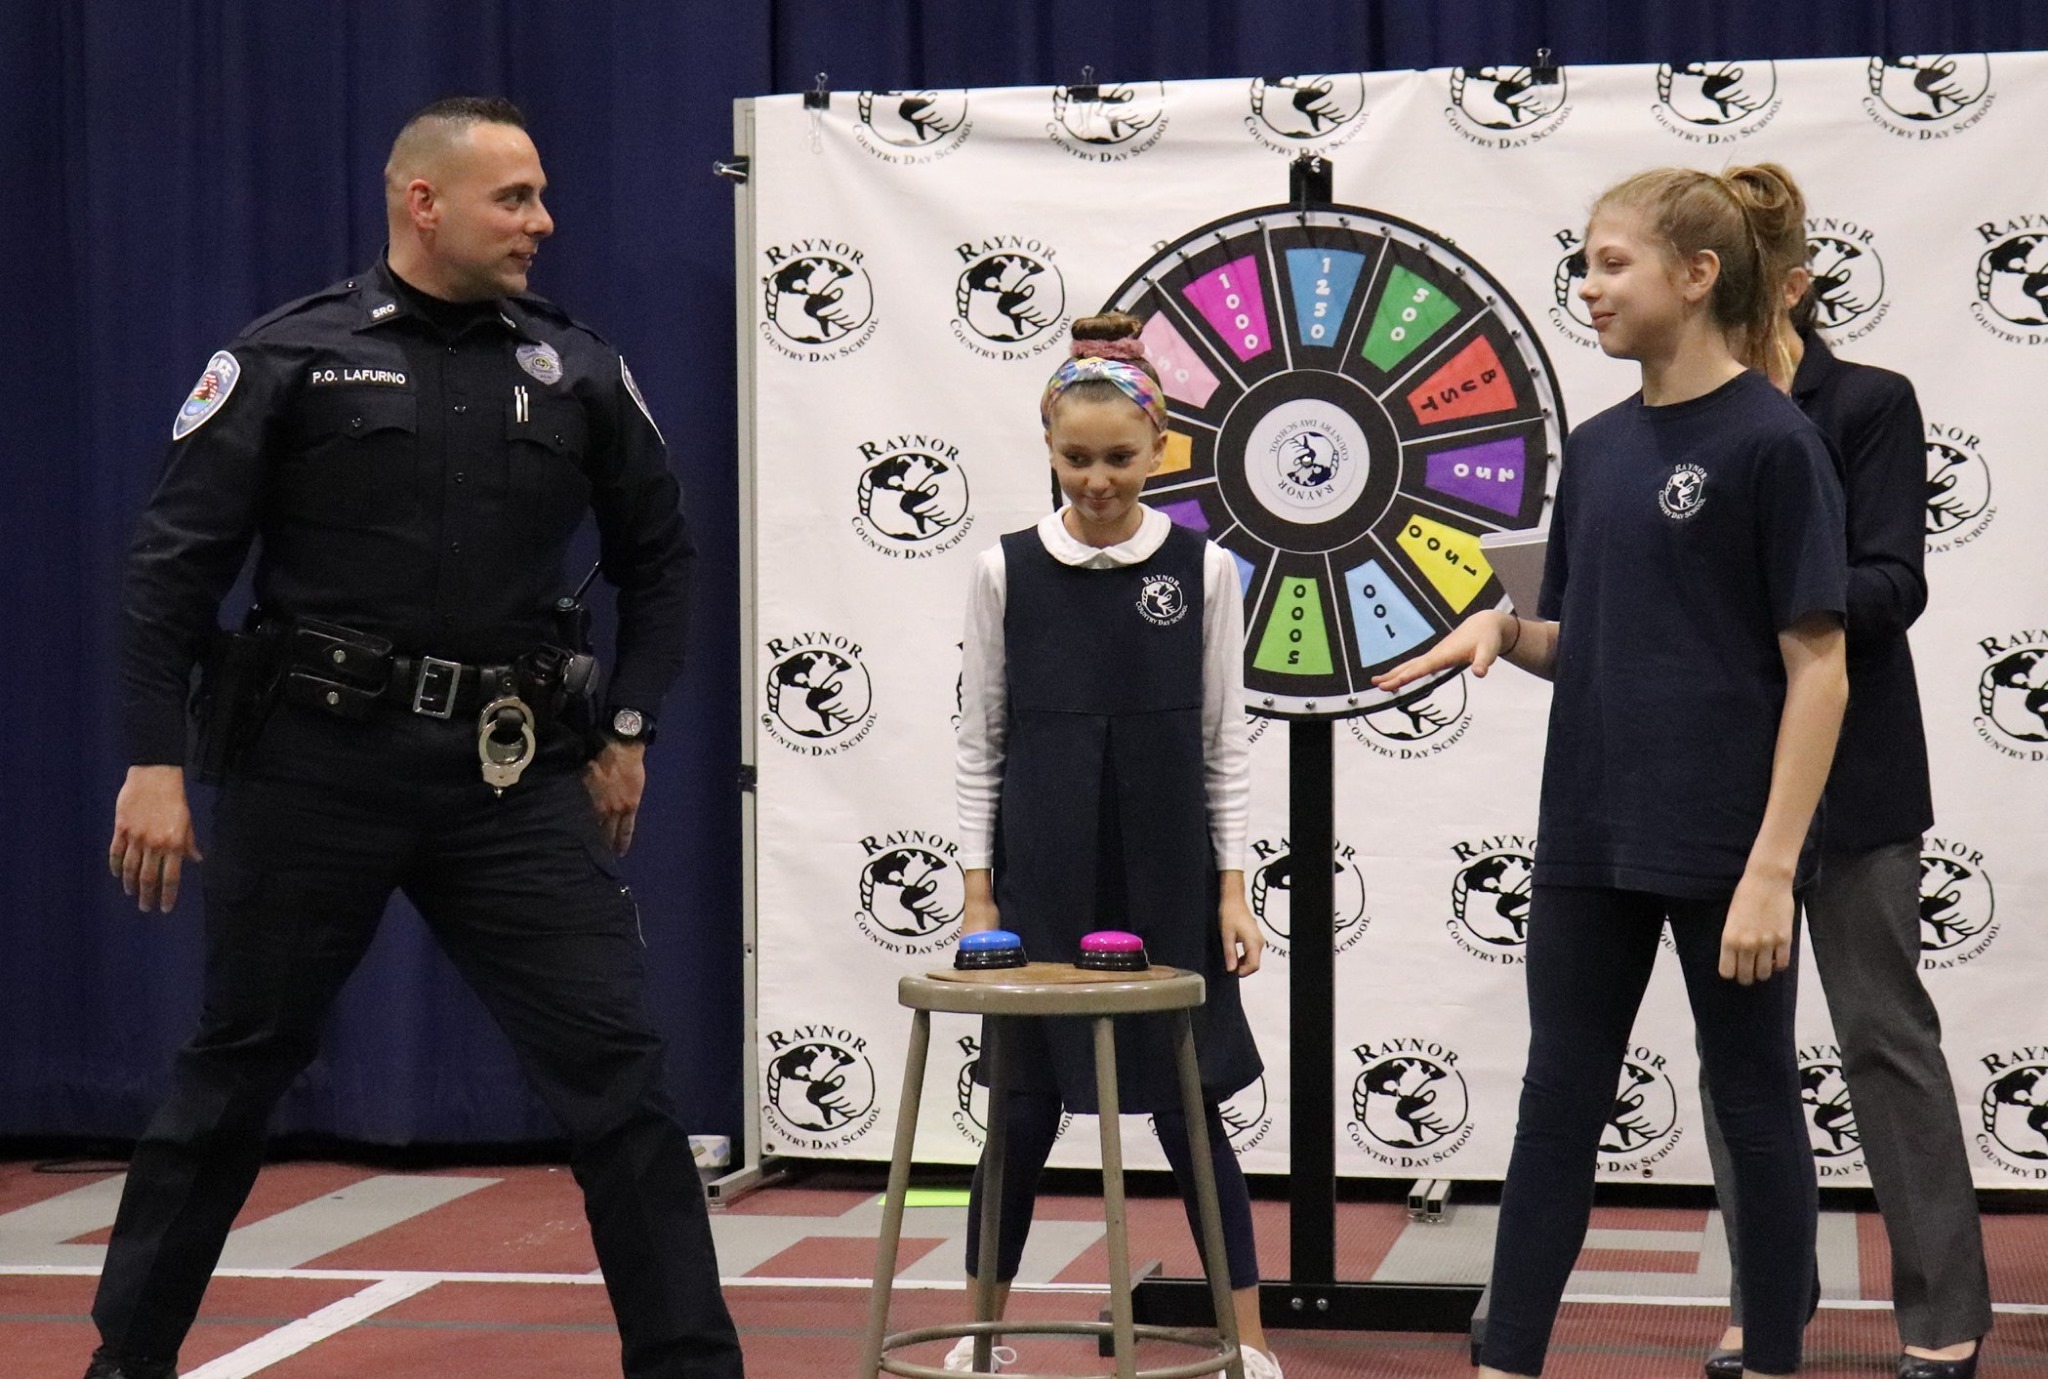 On Thursday, February 13, Raynor Country Day School and the Southampton Town Police Department faced off in the school's first 